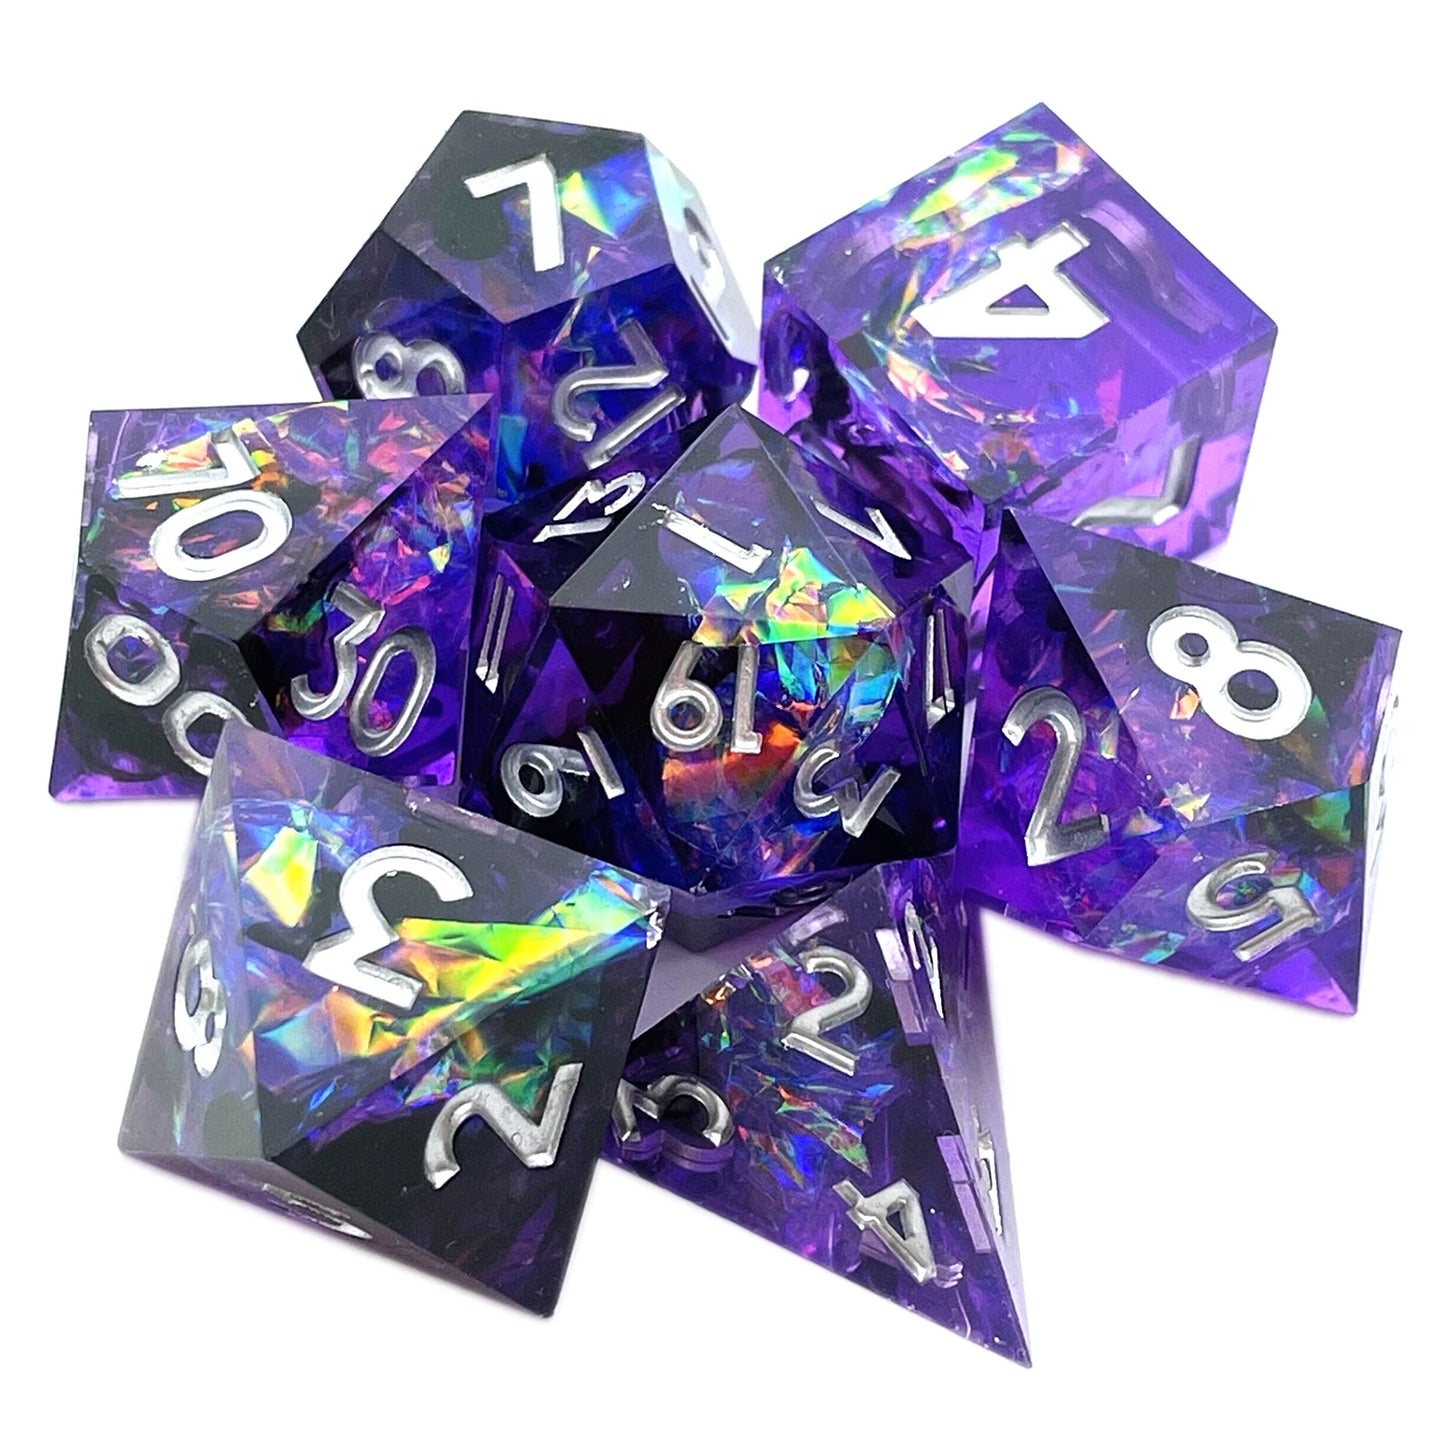 2023 Resin Dice 7PCs Dnd Set Solid Polyhedral D&D Dice DND For Role Playing Rpg Rol Pathfinder Board Game Dragon Scale Gifts